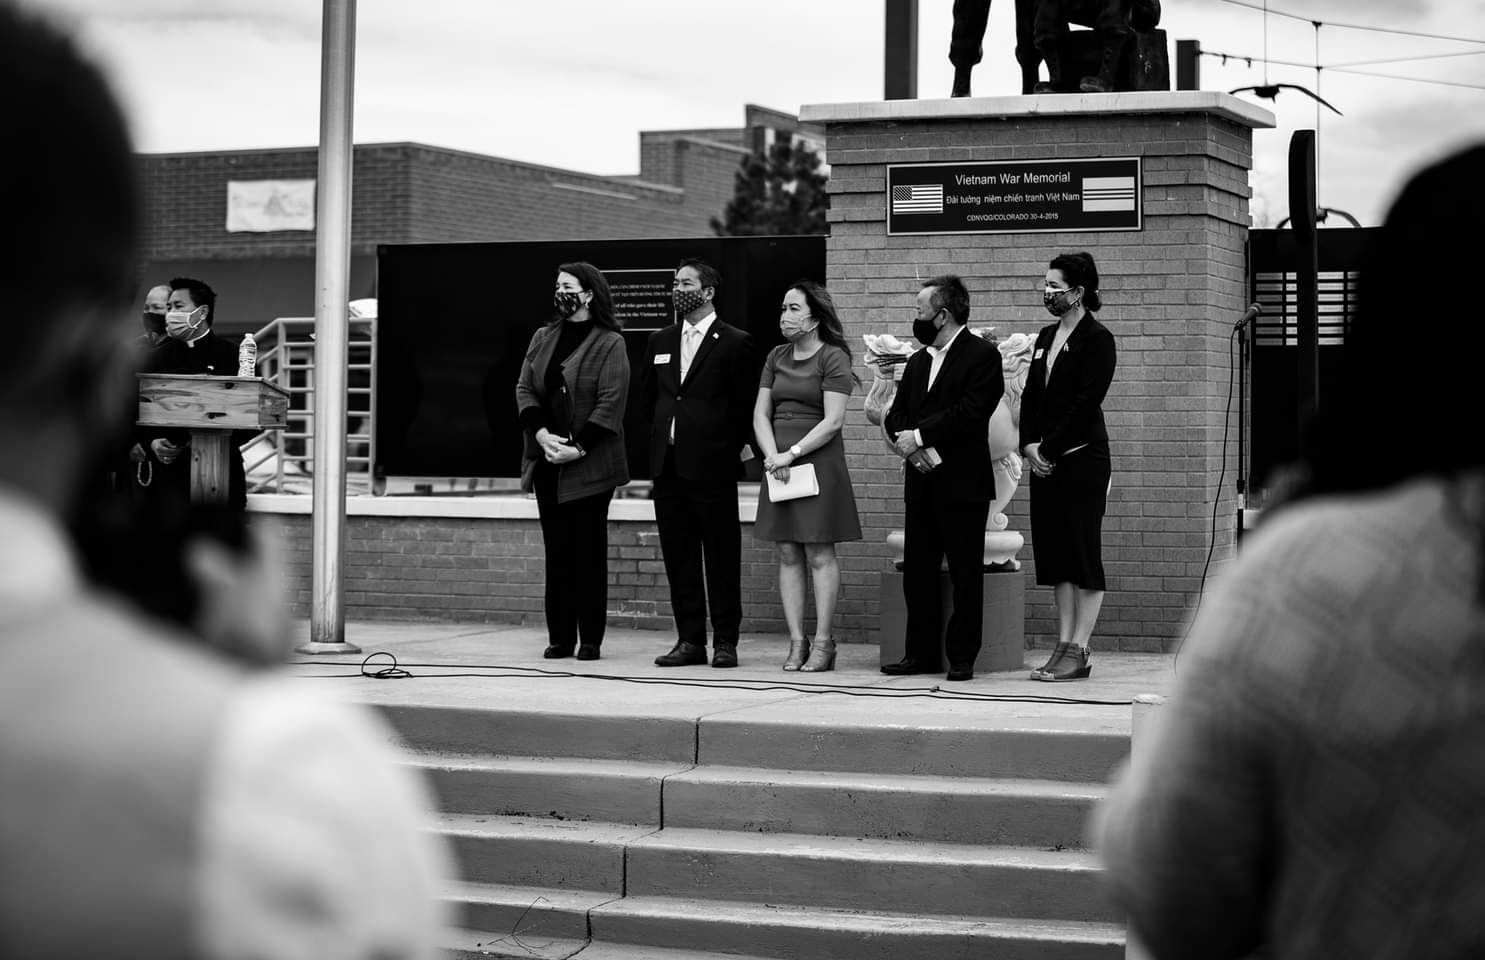 Photo of 4 Asian community leaders including Nga Vương-Sandoval, along with Congresswoman Diana DeGette, attend the AAPI Solidarity Against Racism event at the Việt Nam War Memorial in Denver. They are all standing on a platform, wearing Covid-19 masks facing the speaker at the podium to the left of the image.